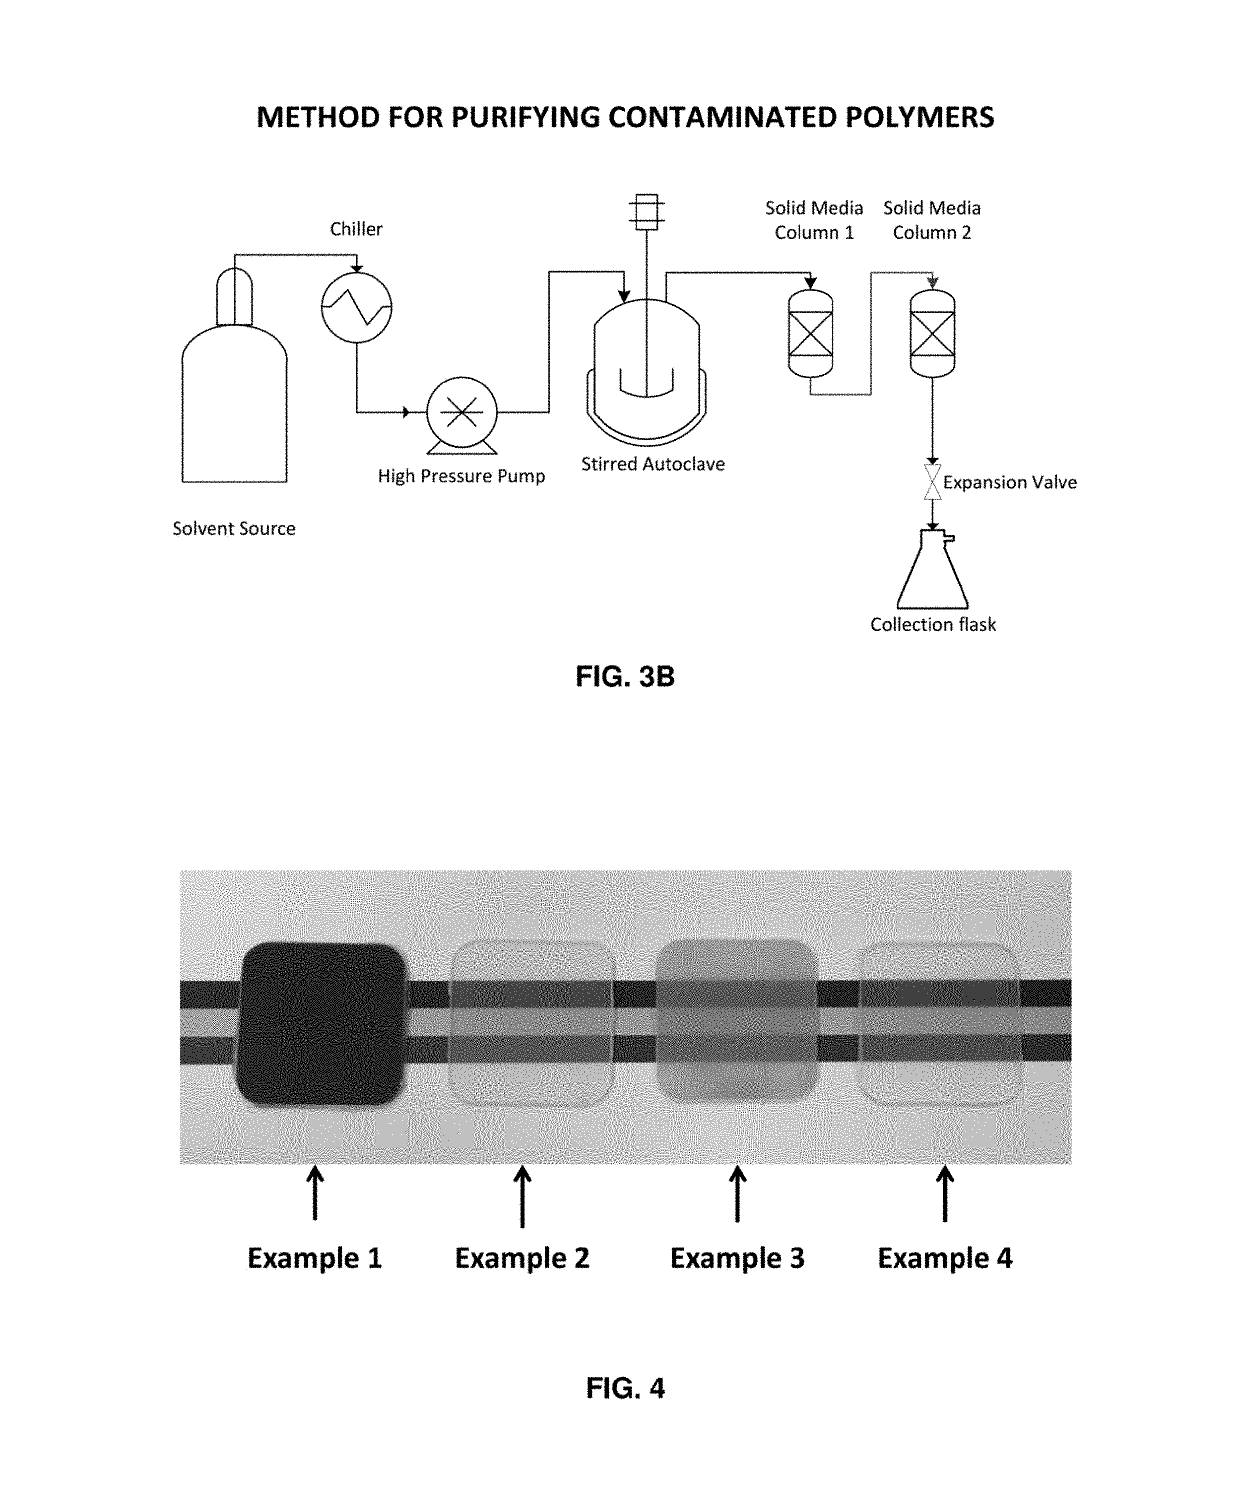 Method for purifying reclaimed polymers